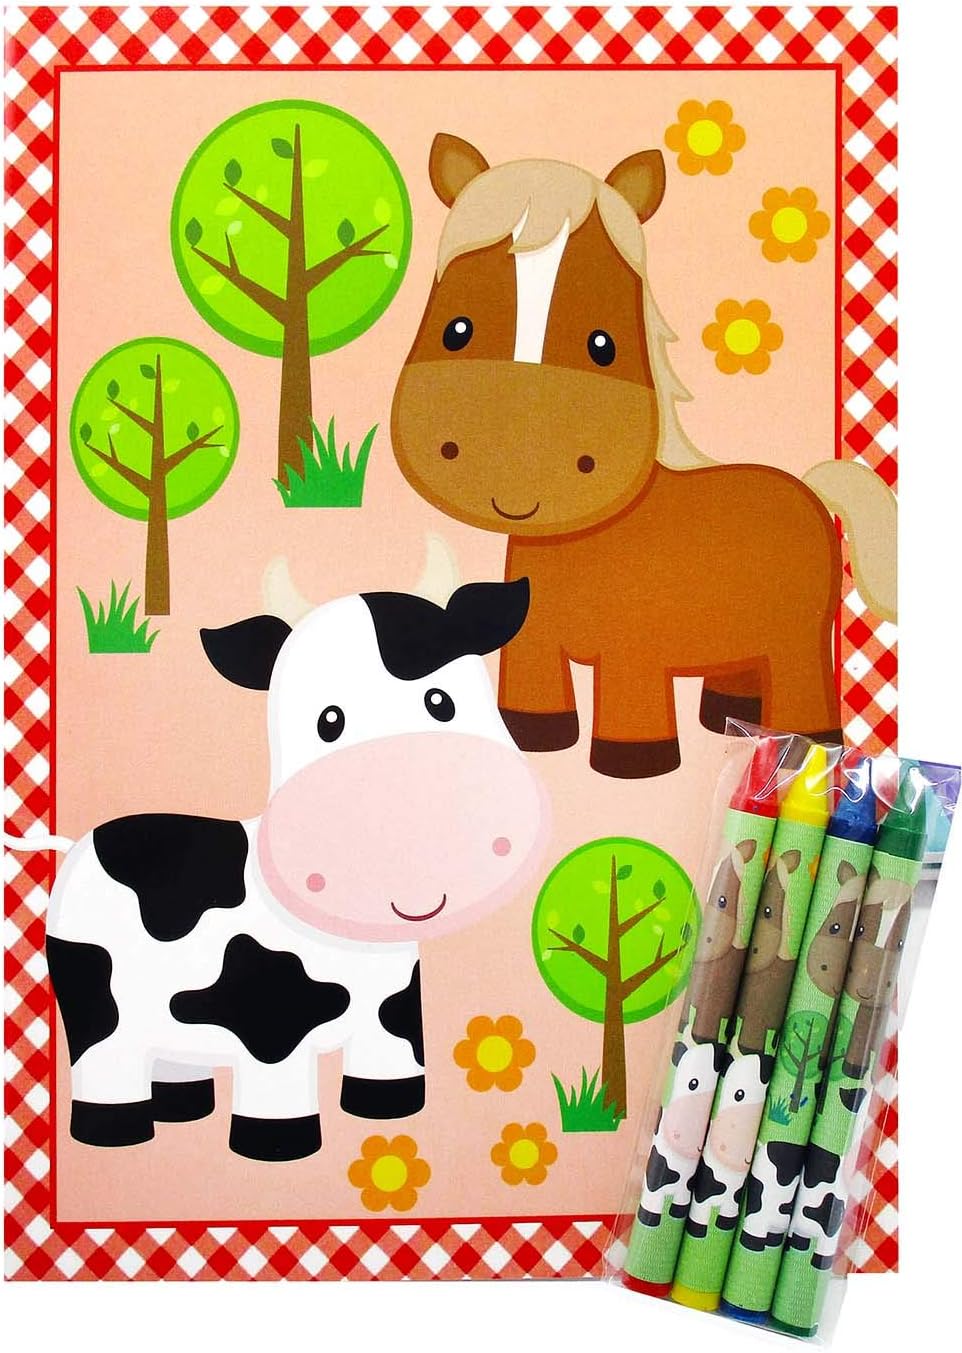 Tiny Mills Farm Animals Coloring Books with Crayons Party Favors with 12 Coloring Books and 48 Crayons